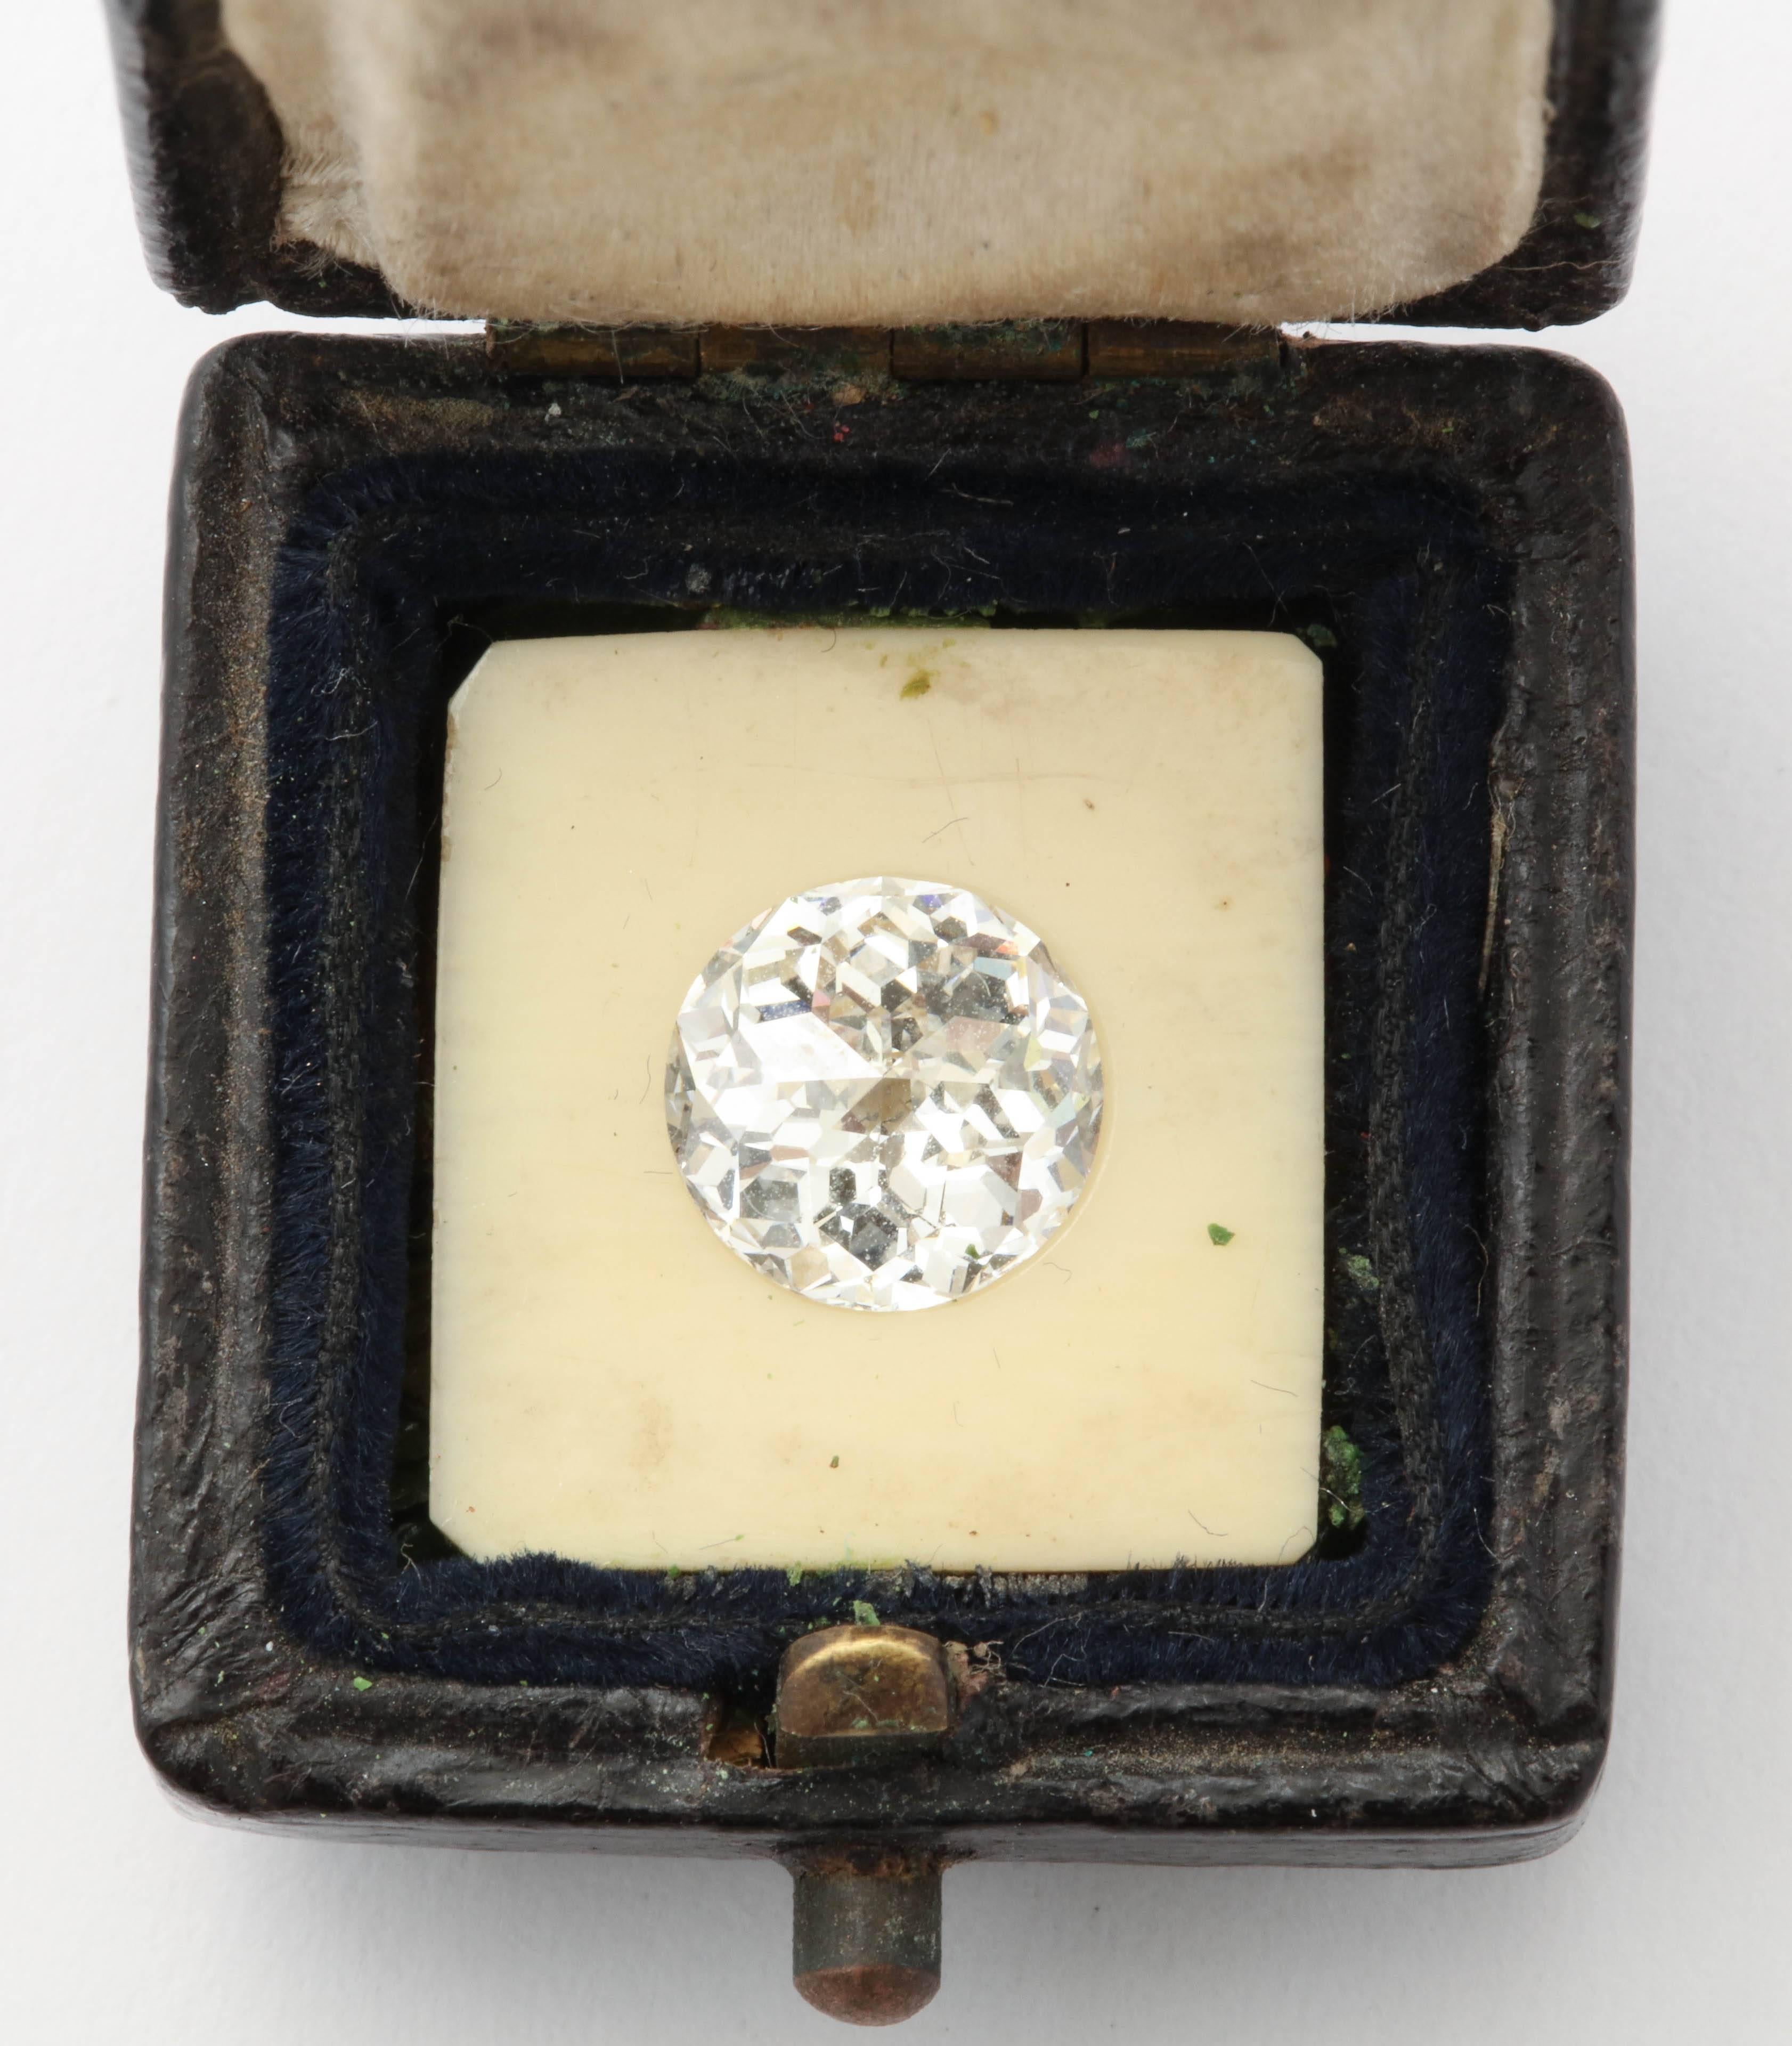 Truly a masterpiece, in its original fitted box. This diamond in its current form dates to around 1902 when David Townsend, a famous New York diamond cutter, patented this cut. It weighs 1.87 carats and is K in color with VS1 clarity, GIA certified.